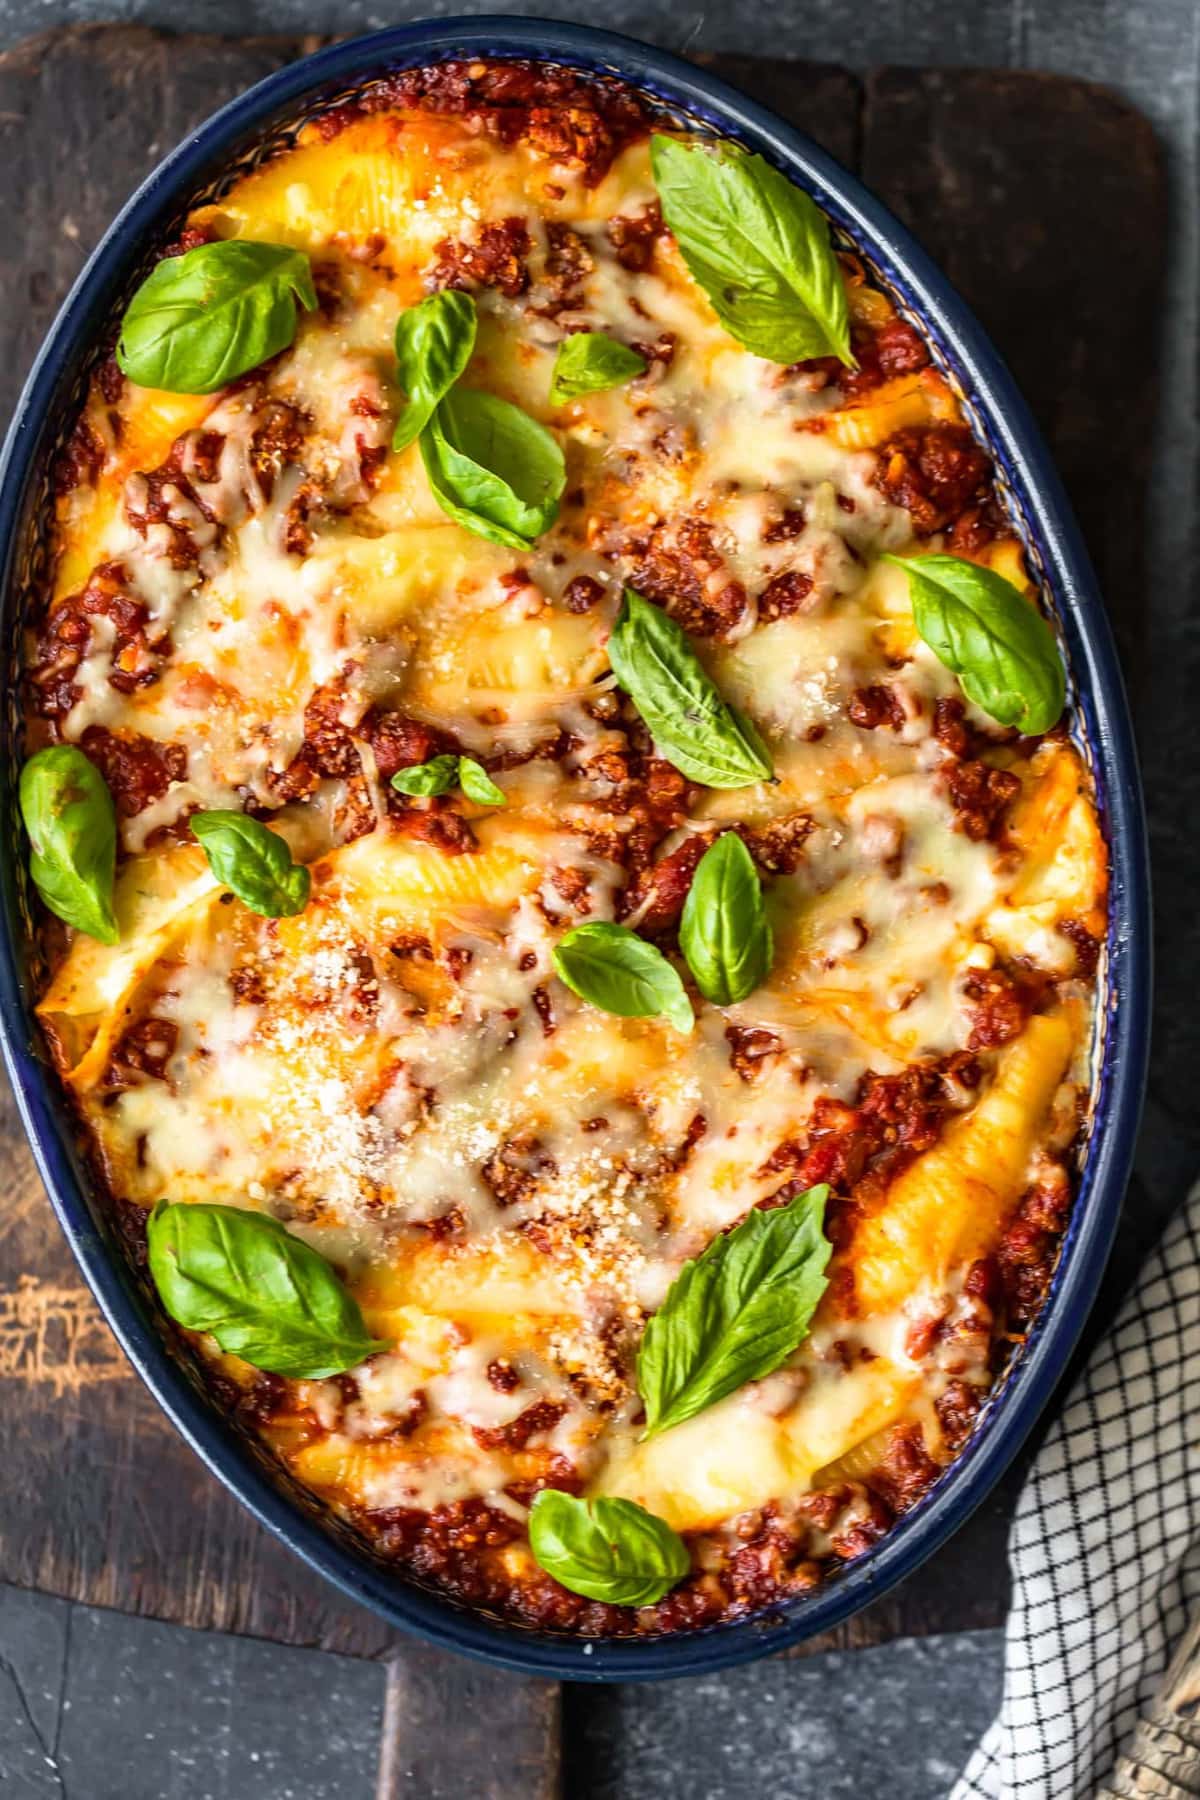 stuffed pasta shells topped with cheese and basil leaves in a casserole dish